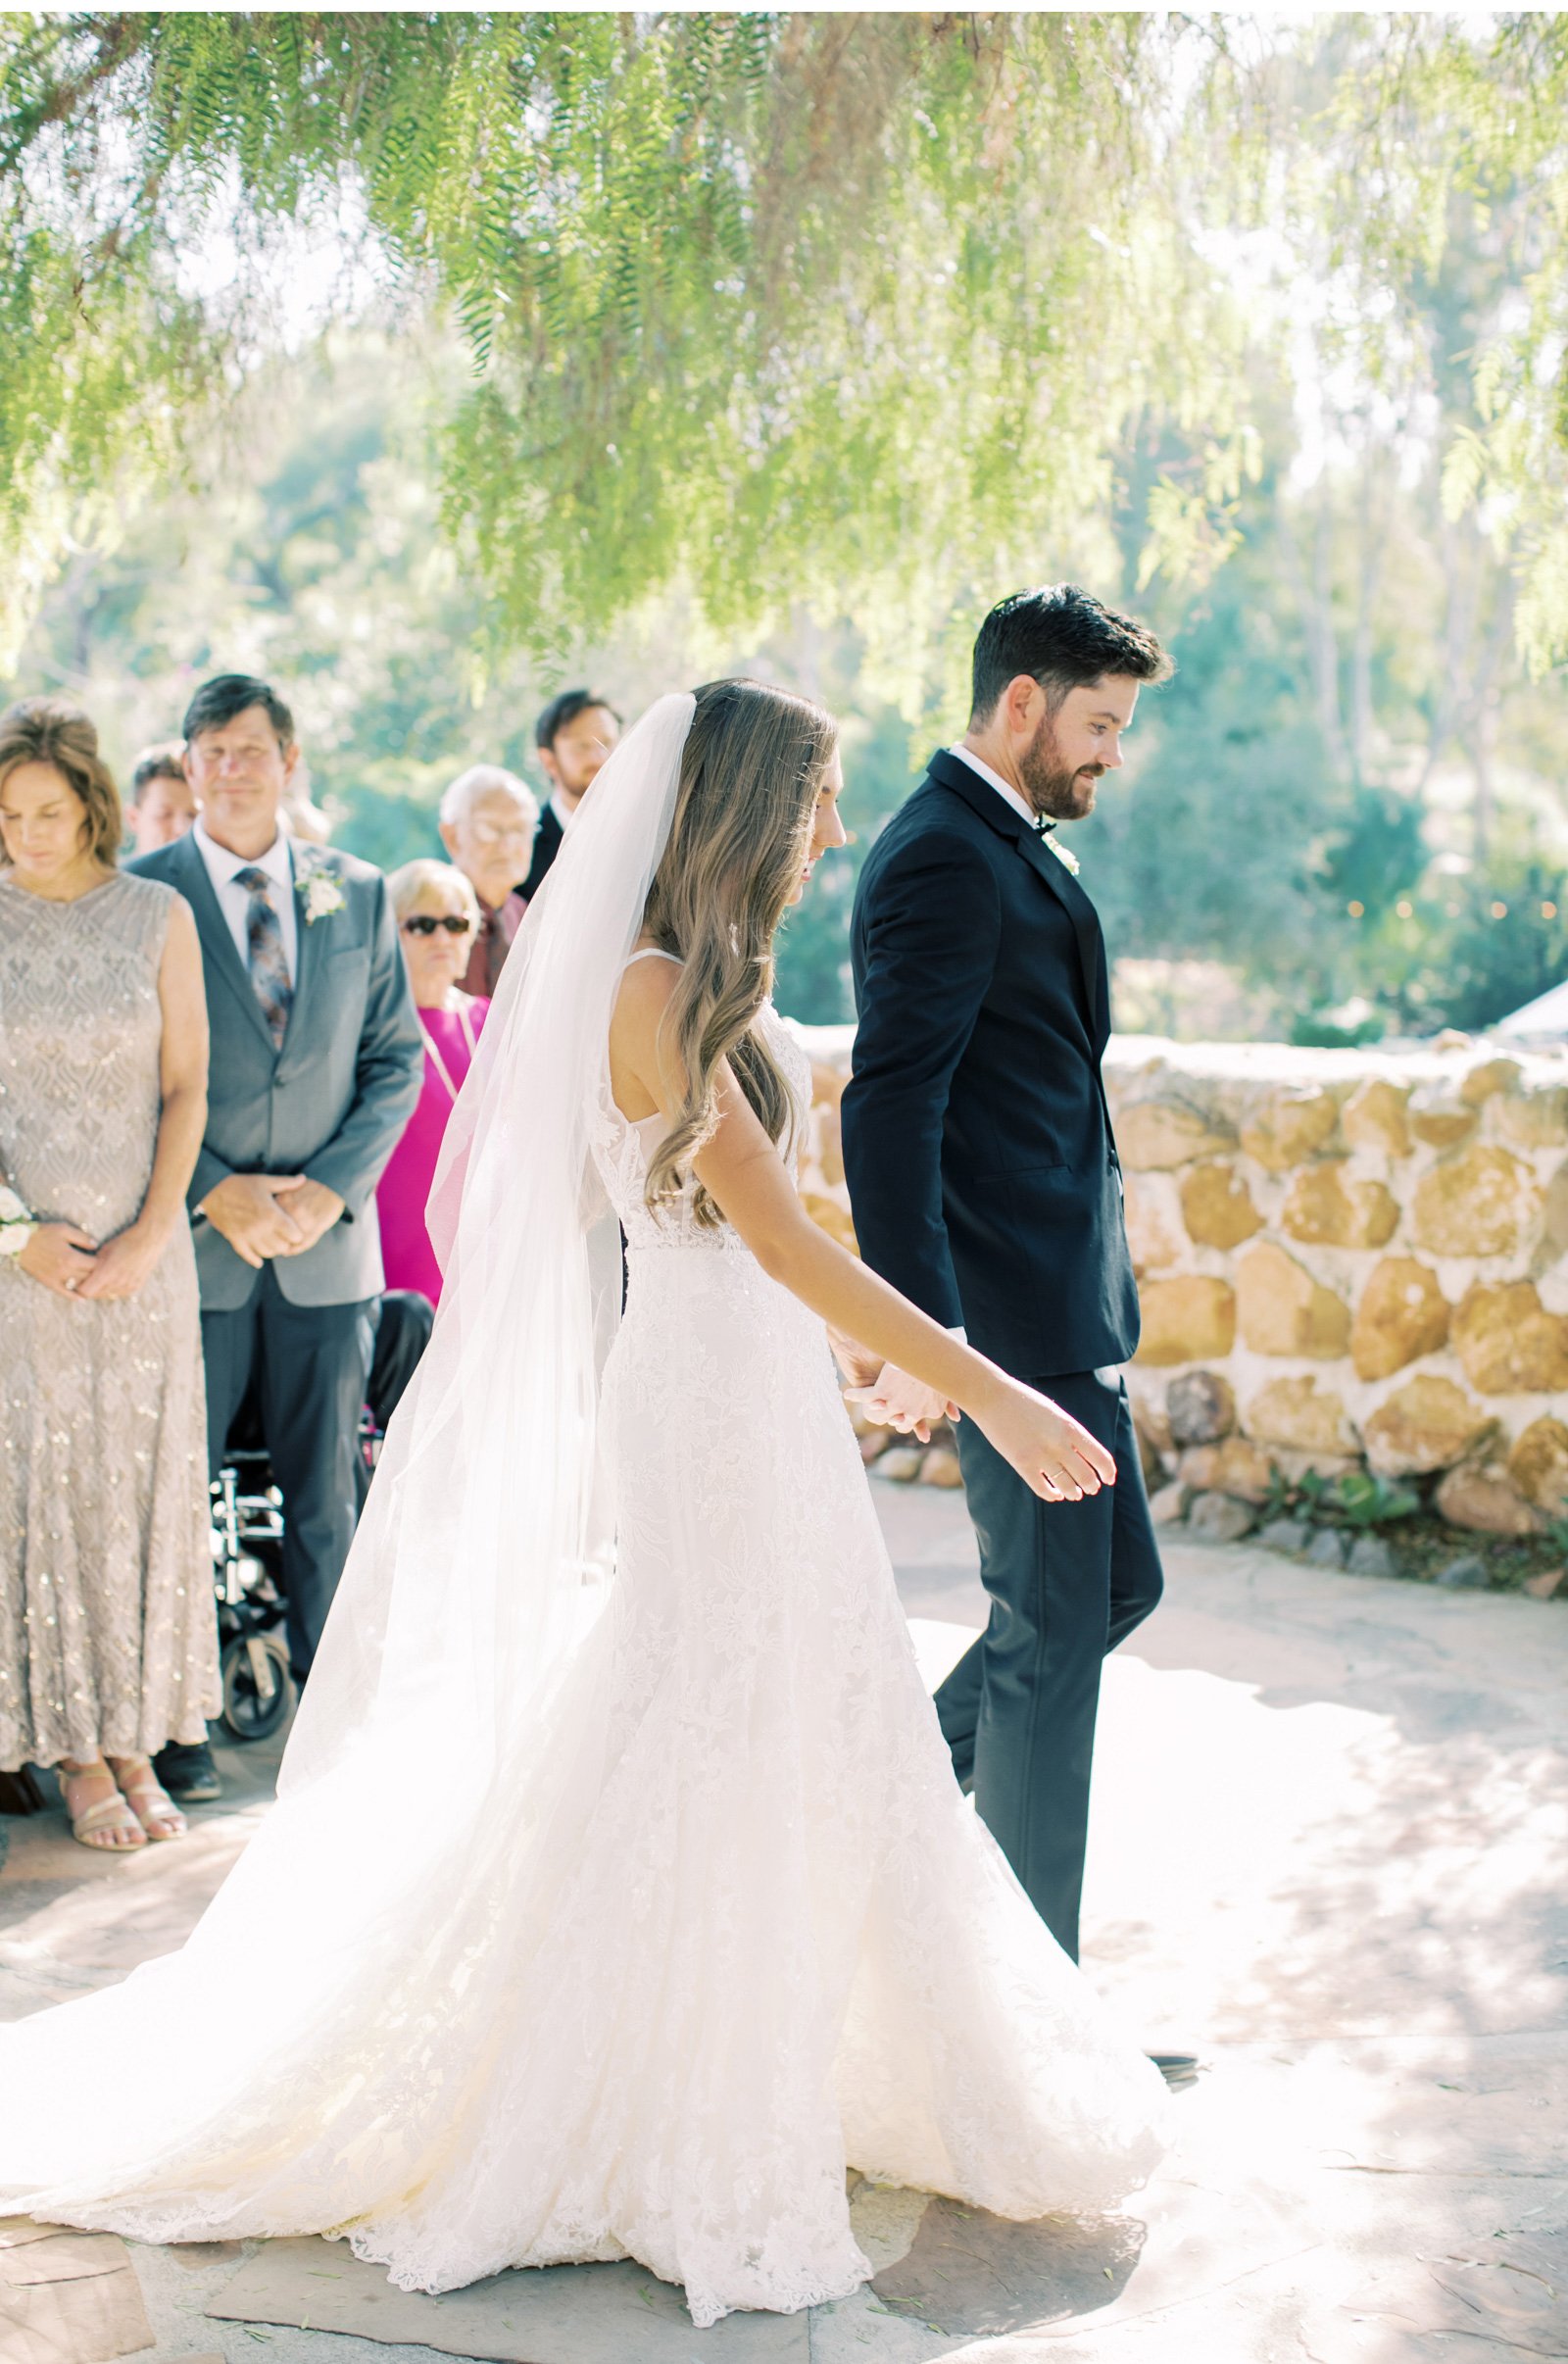 Leo-Carillo-Weddings-Bright-and-Airy-Wedding-Photography-Top-Wedding-Photographer-Southern-California-Sand-Diego-_01.jpg